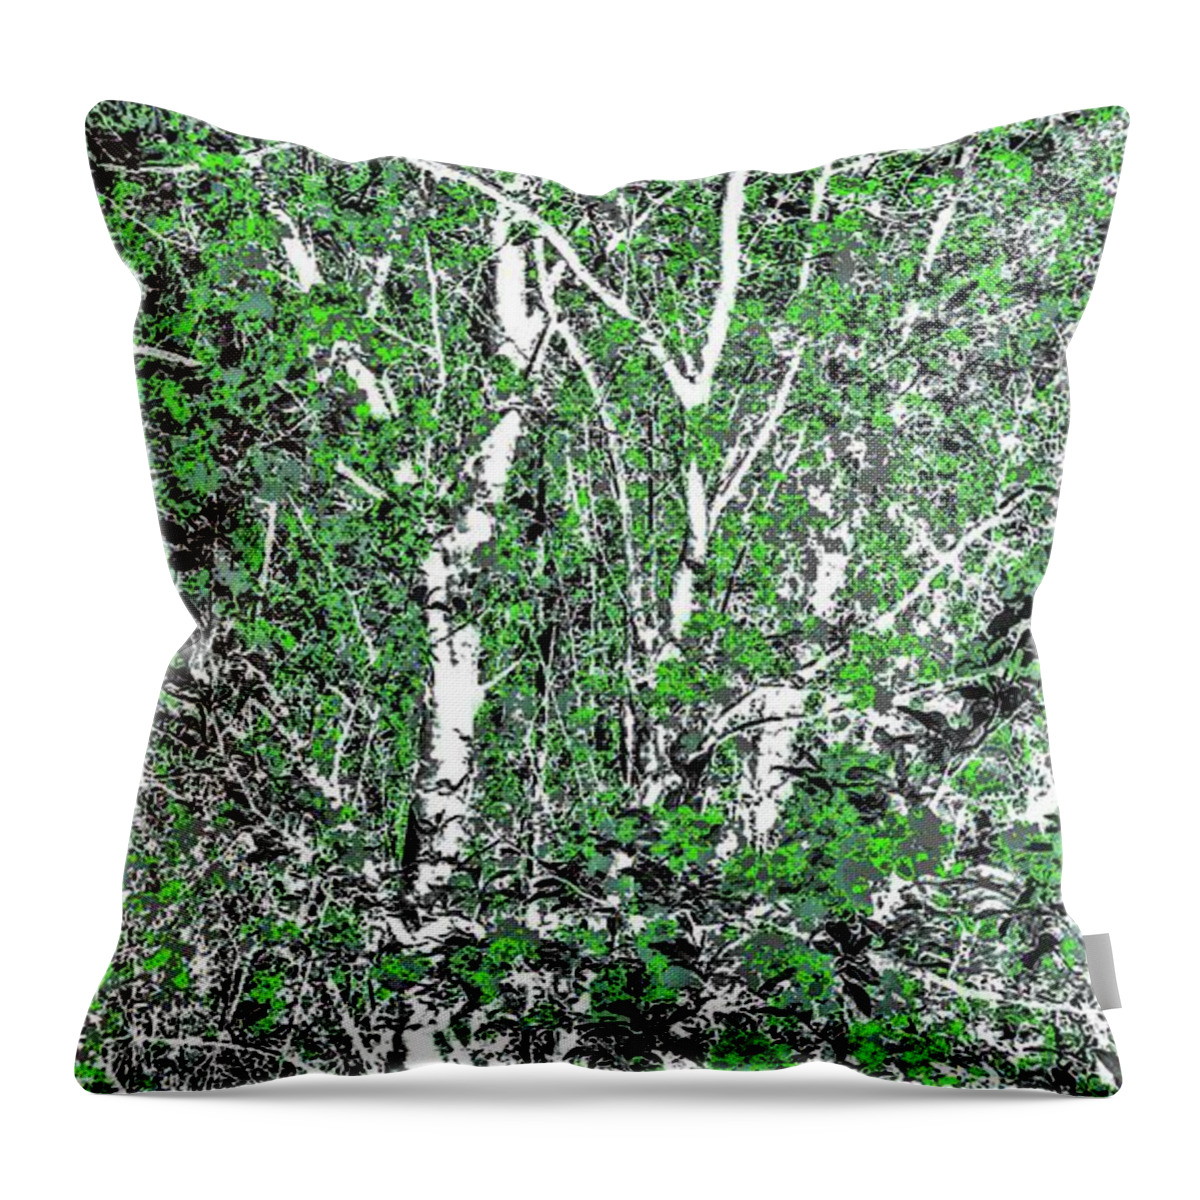 Abstract Trees Throw Pillow featuring the digital art Tree Branch of Green Art by Jeremy Lyman